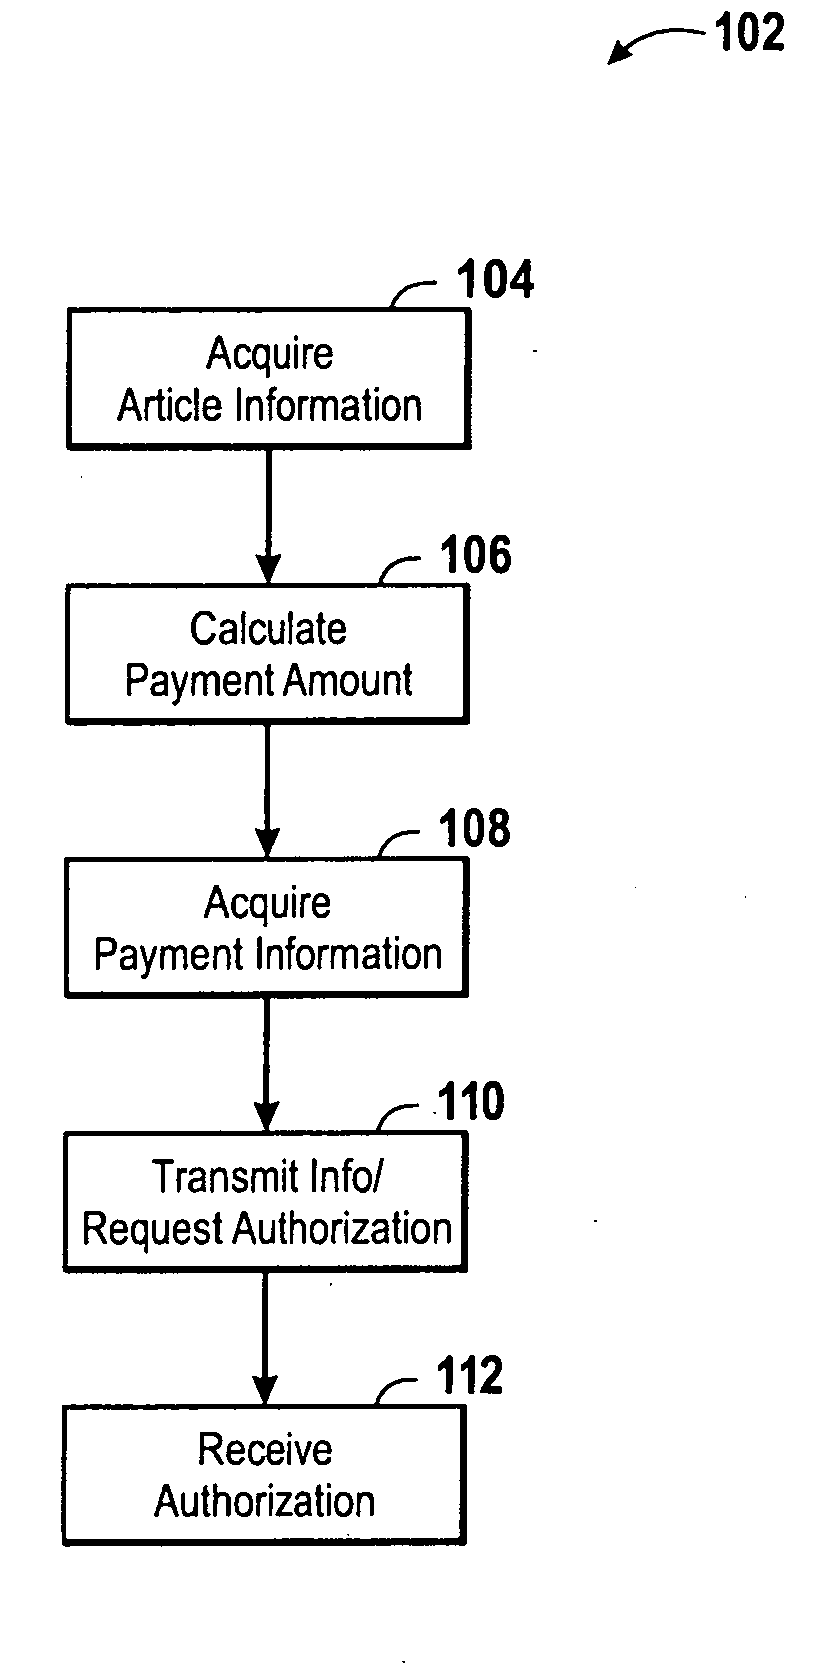 Portable point of purchase devices and methods